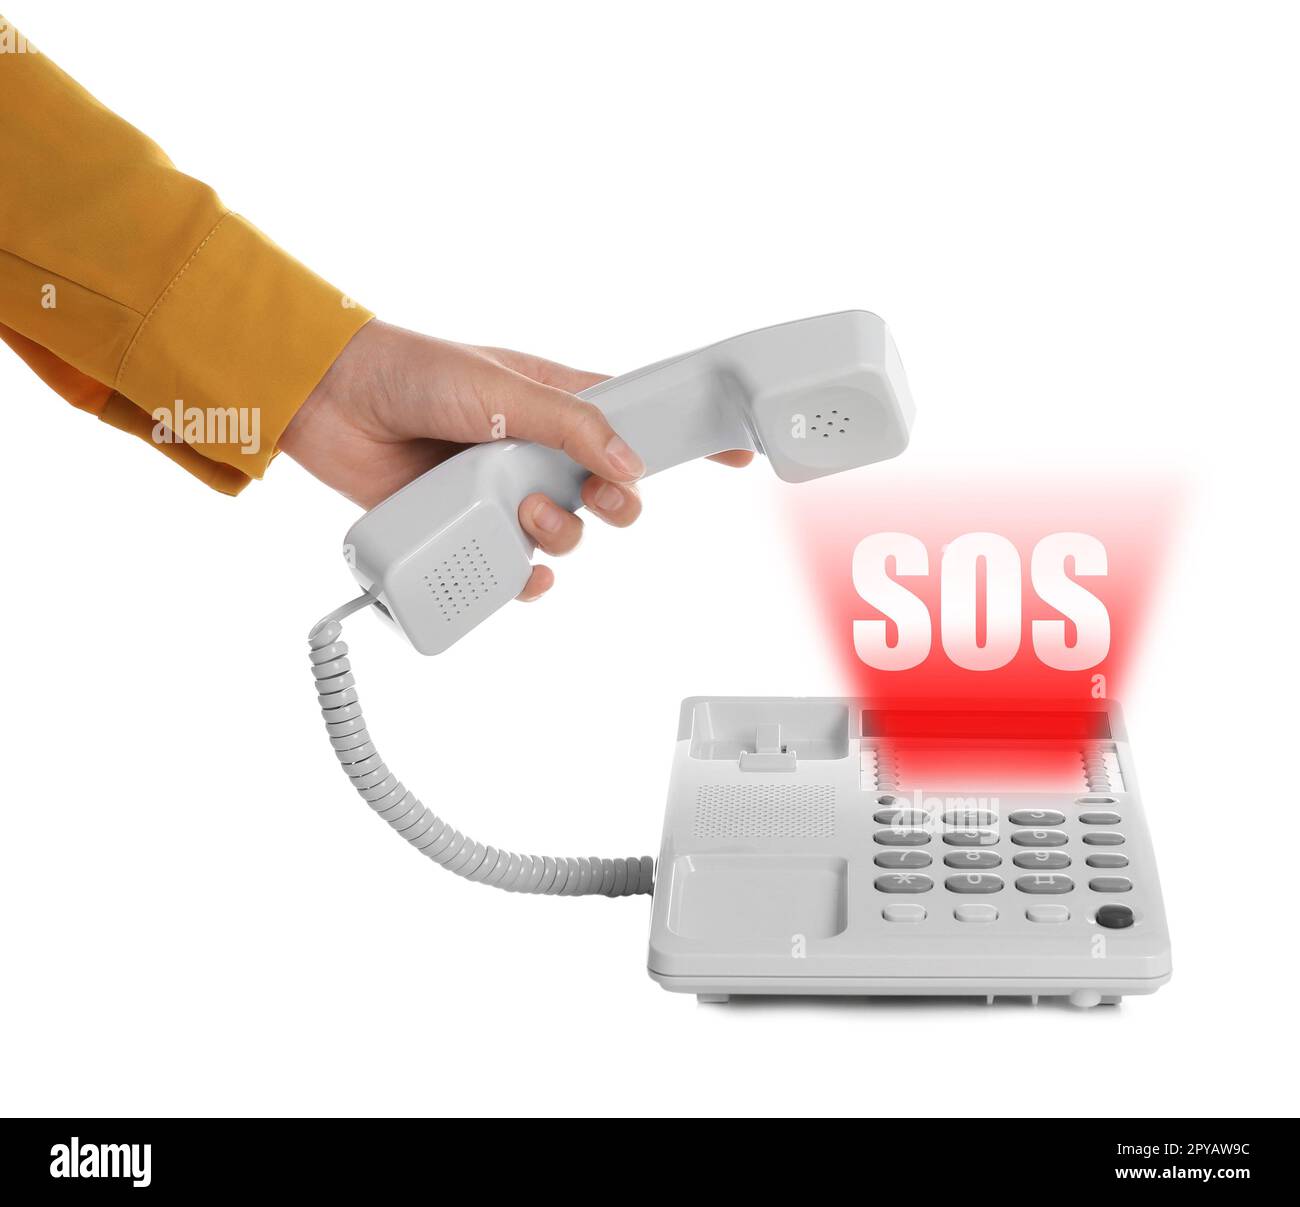 Woman picking up telephone on white background. Emergency SOS call Stock Photo